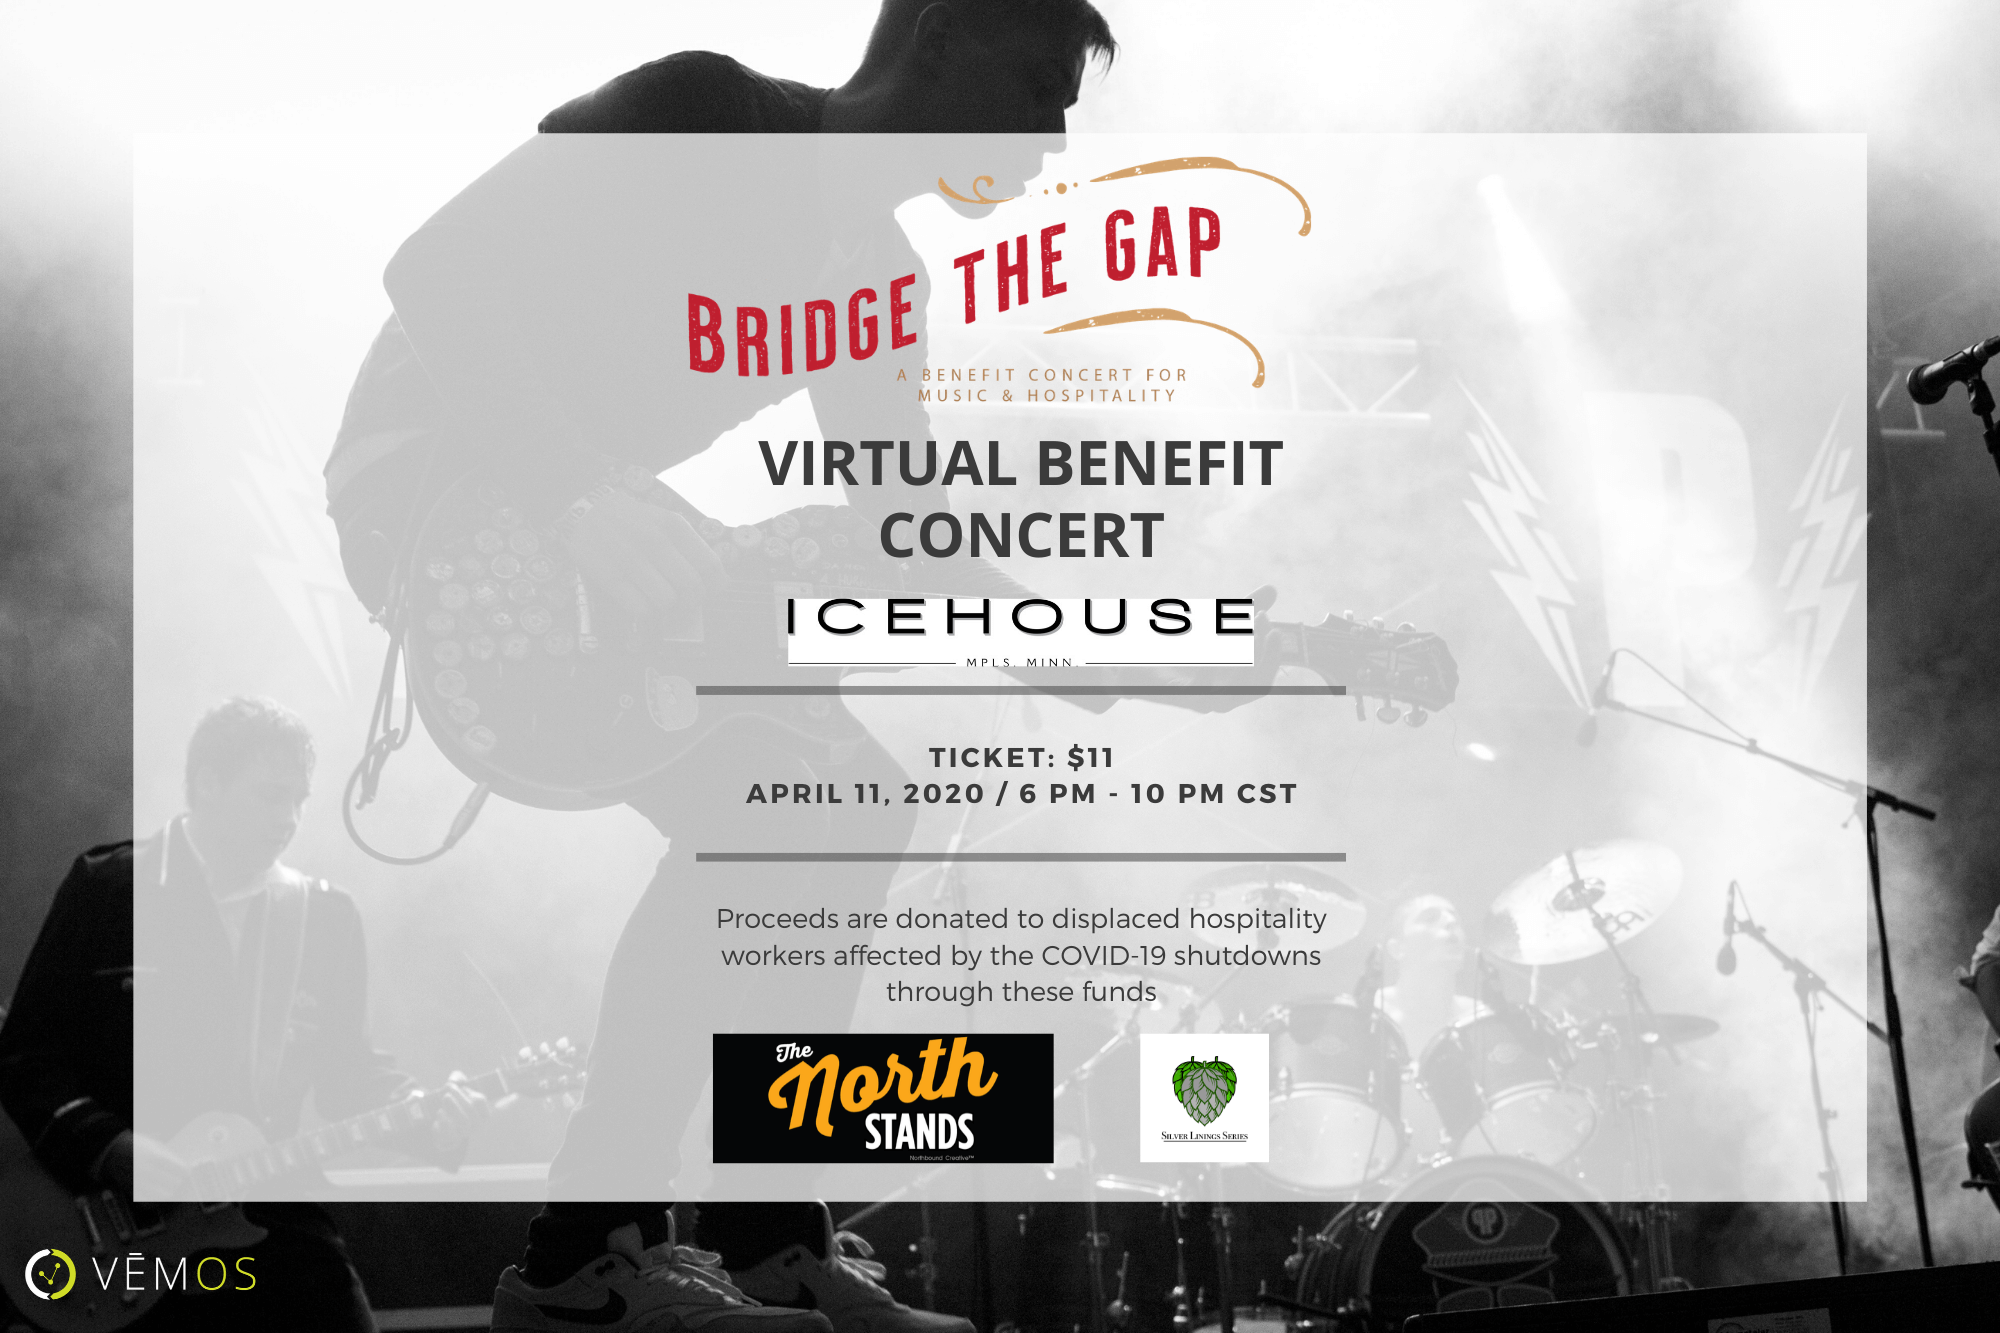 Bridge the Gap benefit by Vemos and Icehouse